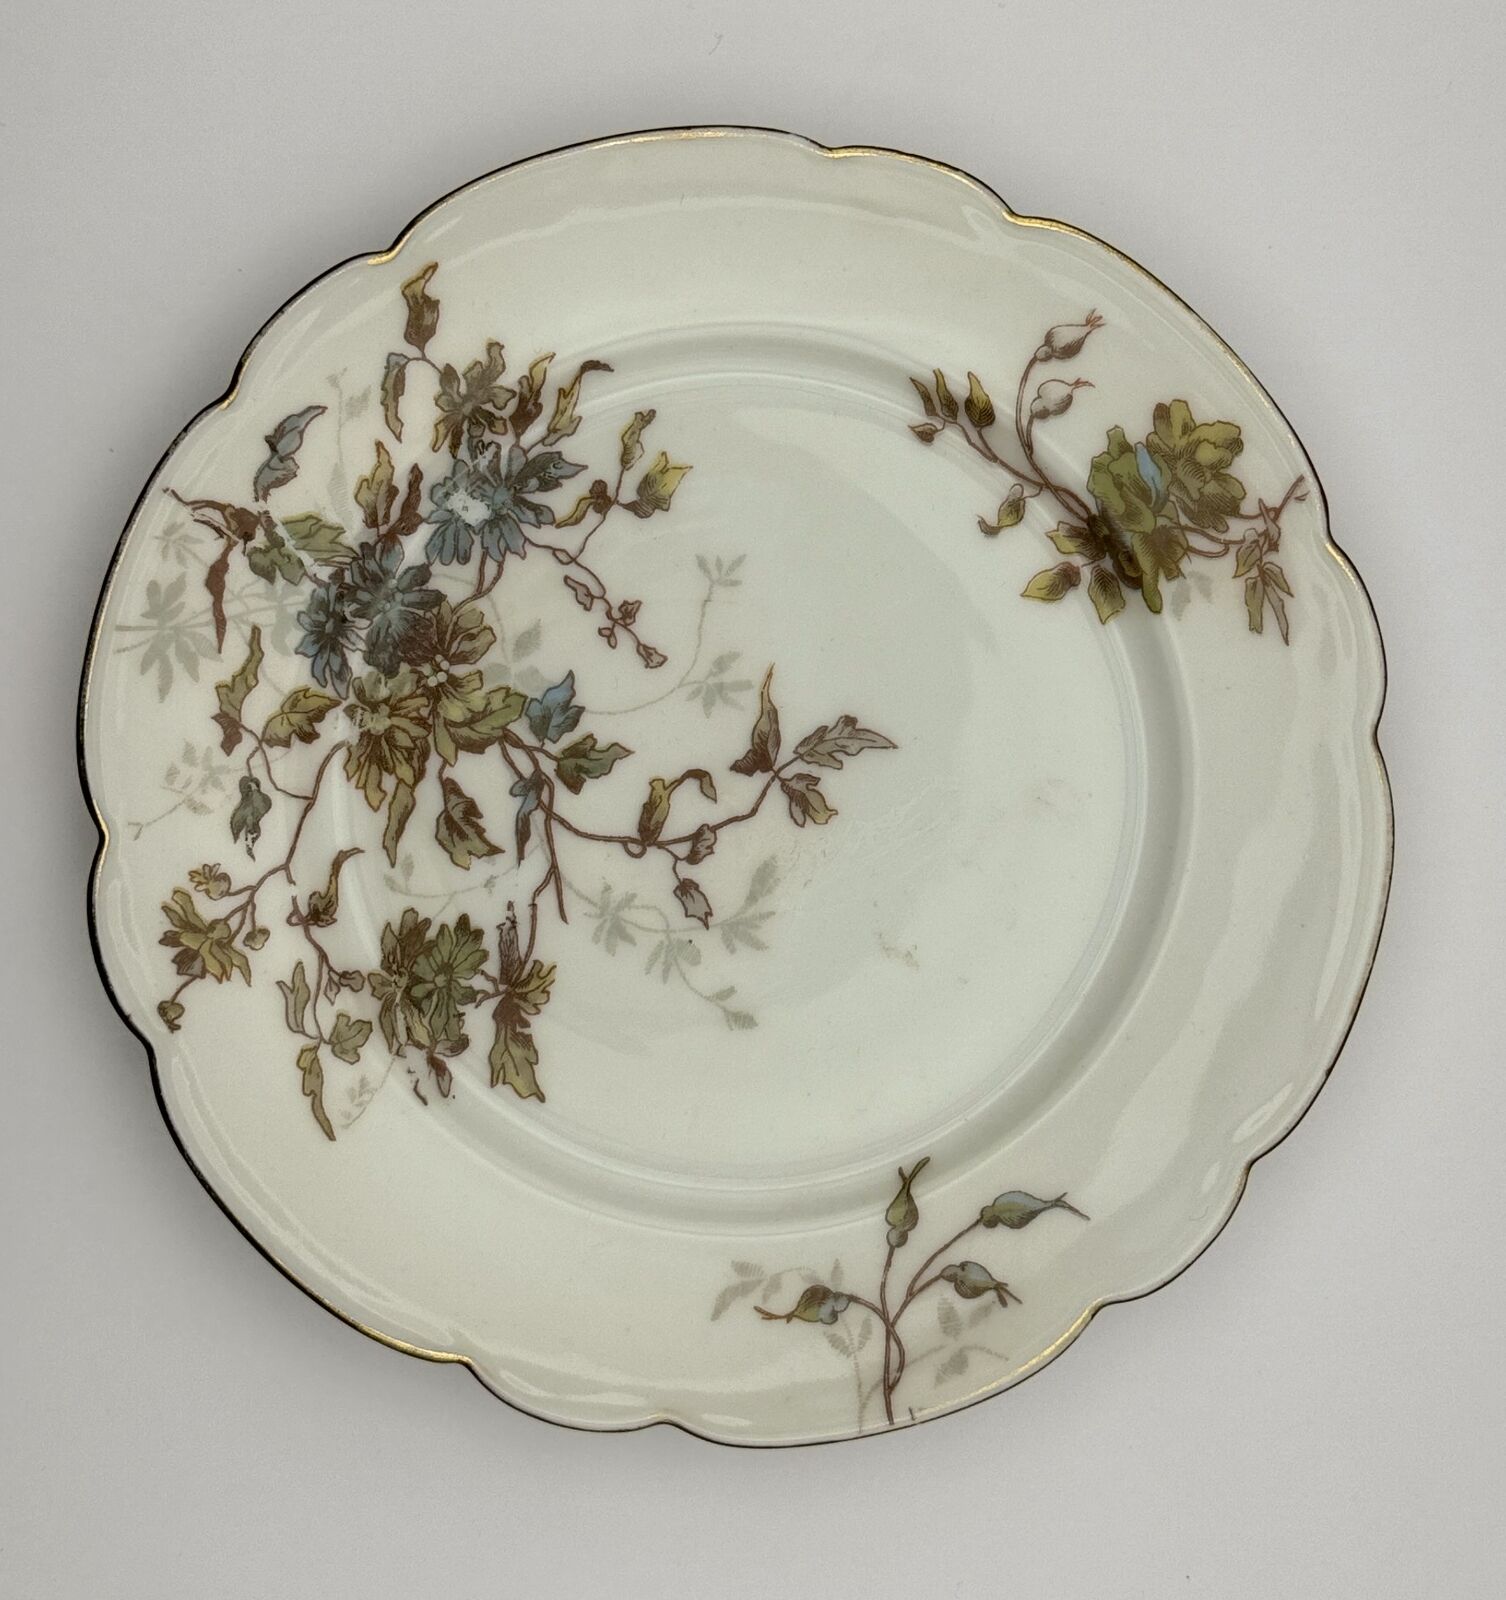 Limoges LS&S Hand-Painted Porcelain Plate with Floral Design